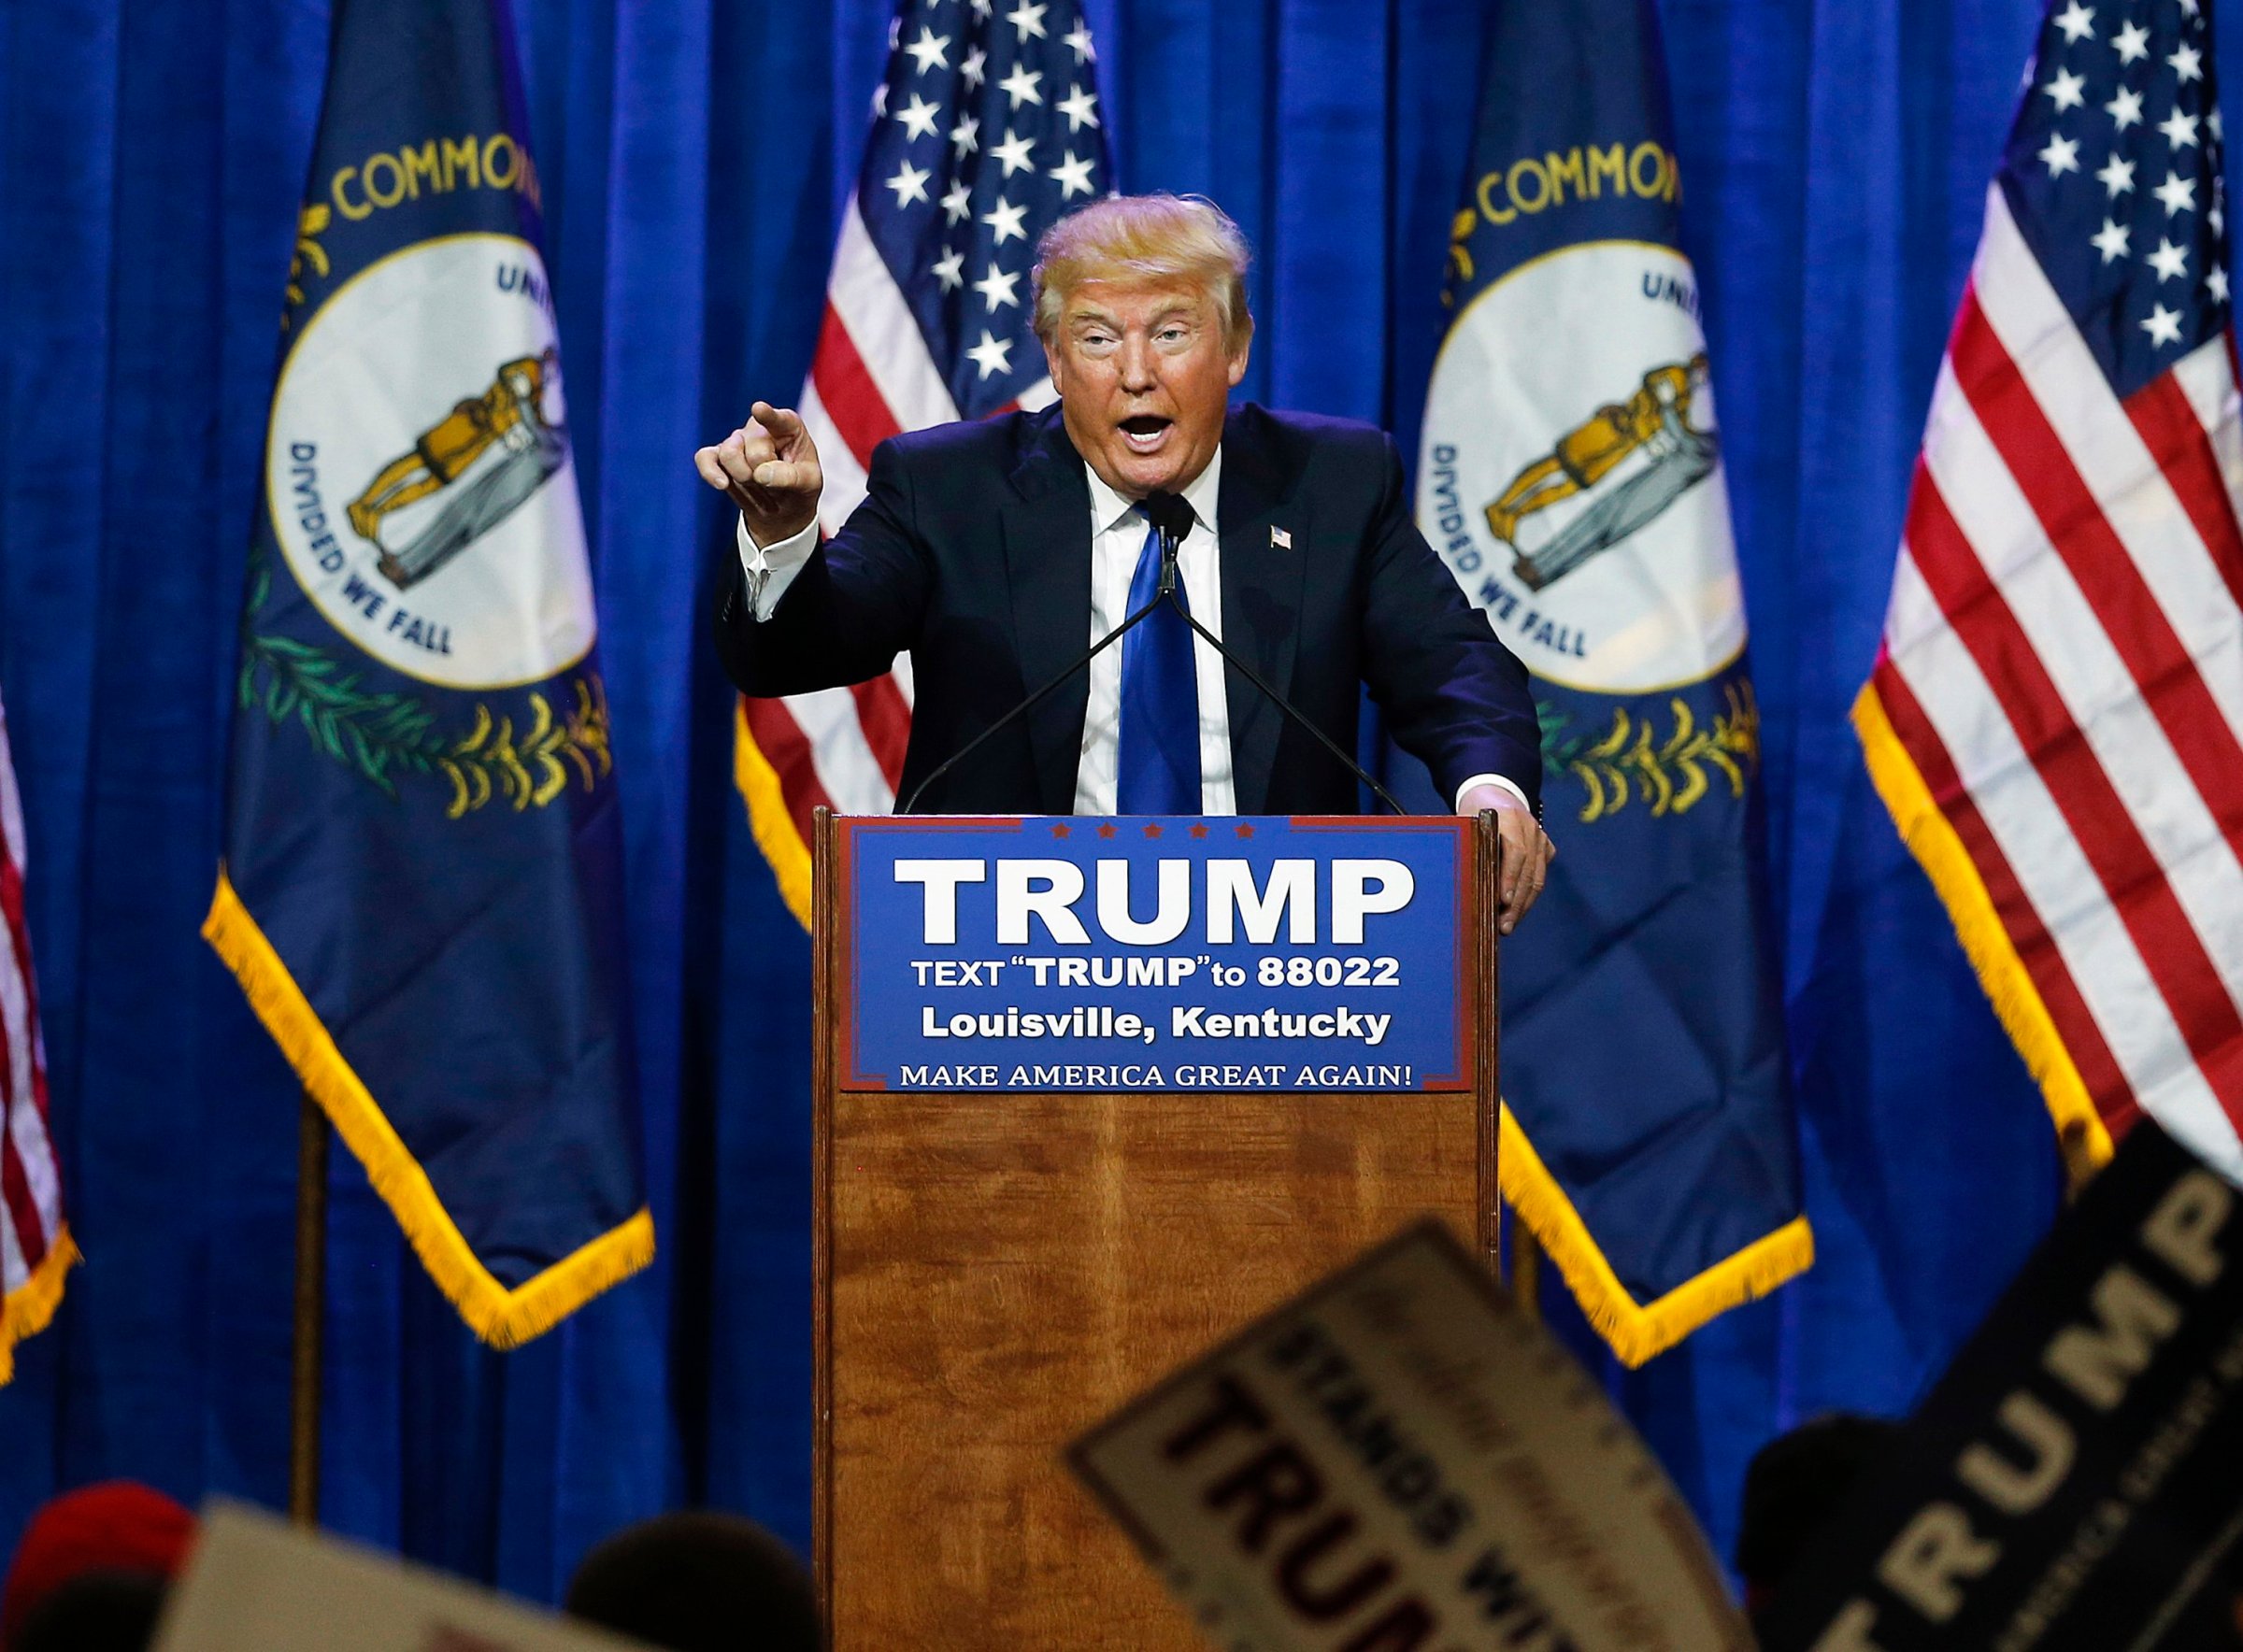 Republican presidential candidate Donald Trump speaks during a rally in Louisville, Ky. on March 1, 2016.